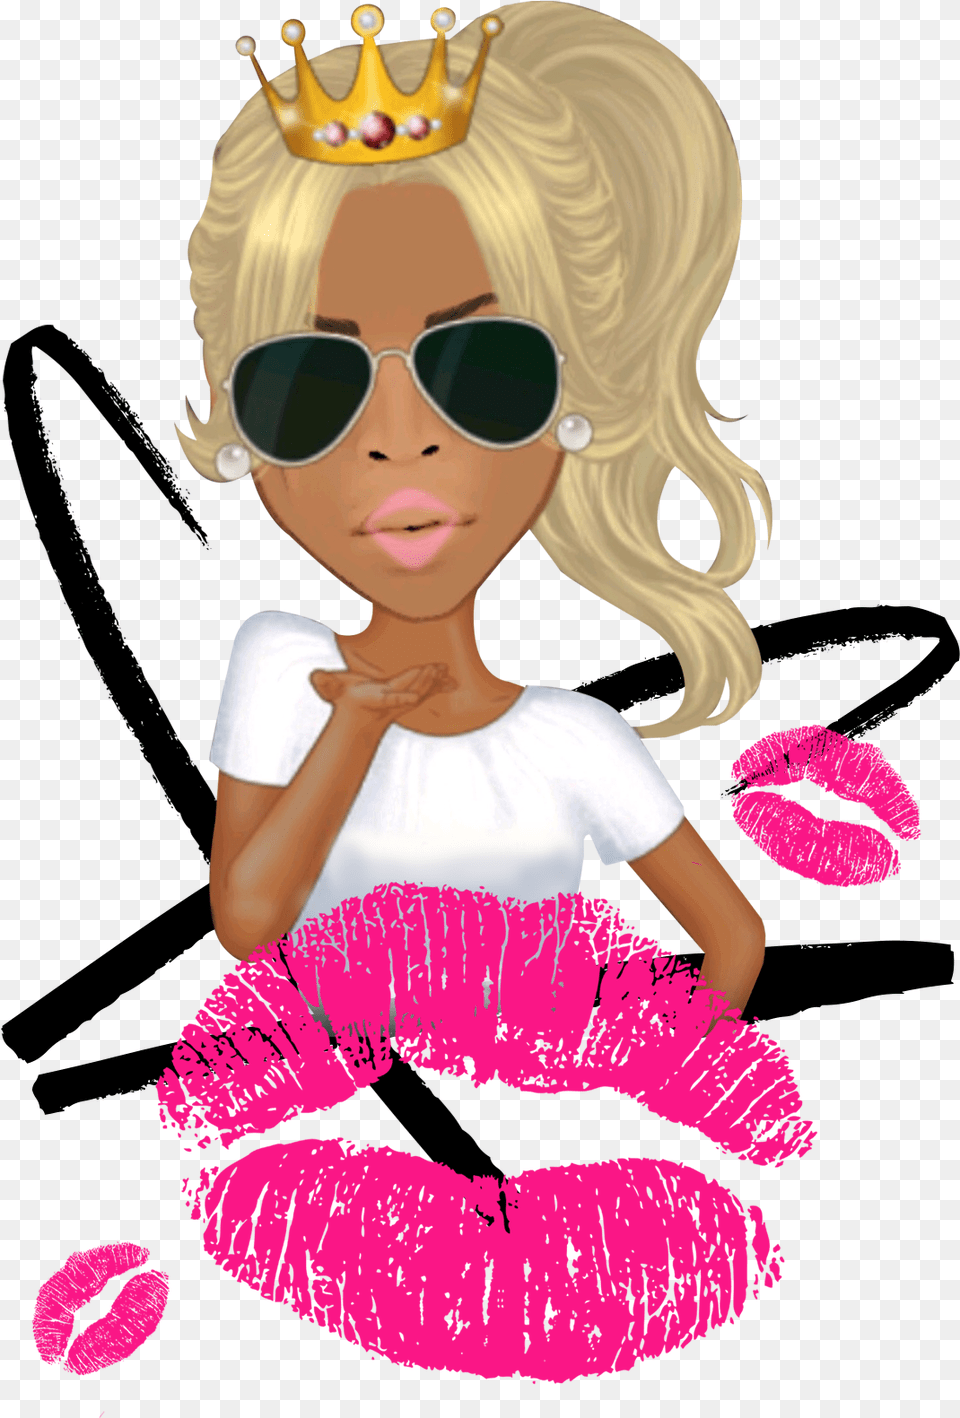 Extensions And Luxury Wigs Clipart Transparent Background Lipstick Kiss, Accessories, Sunglasses, Female, Child Png Image